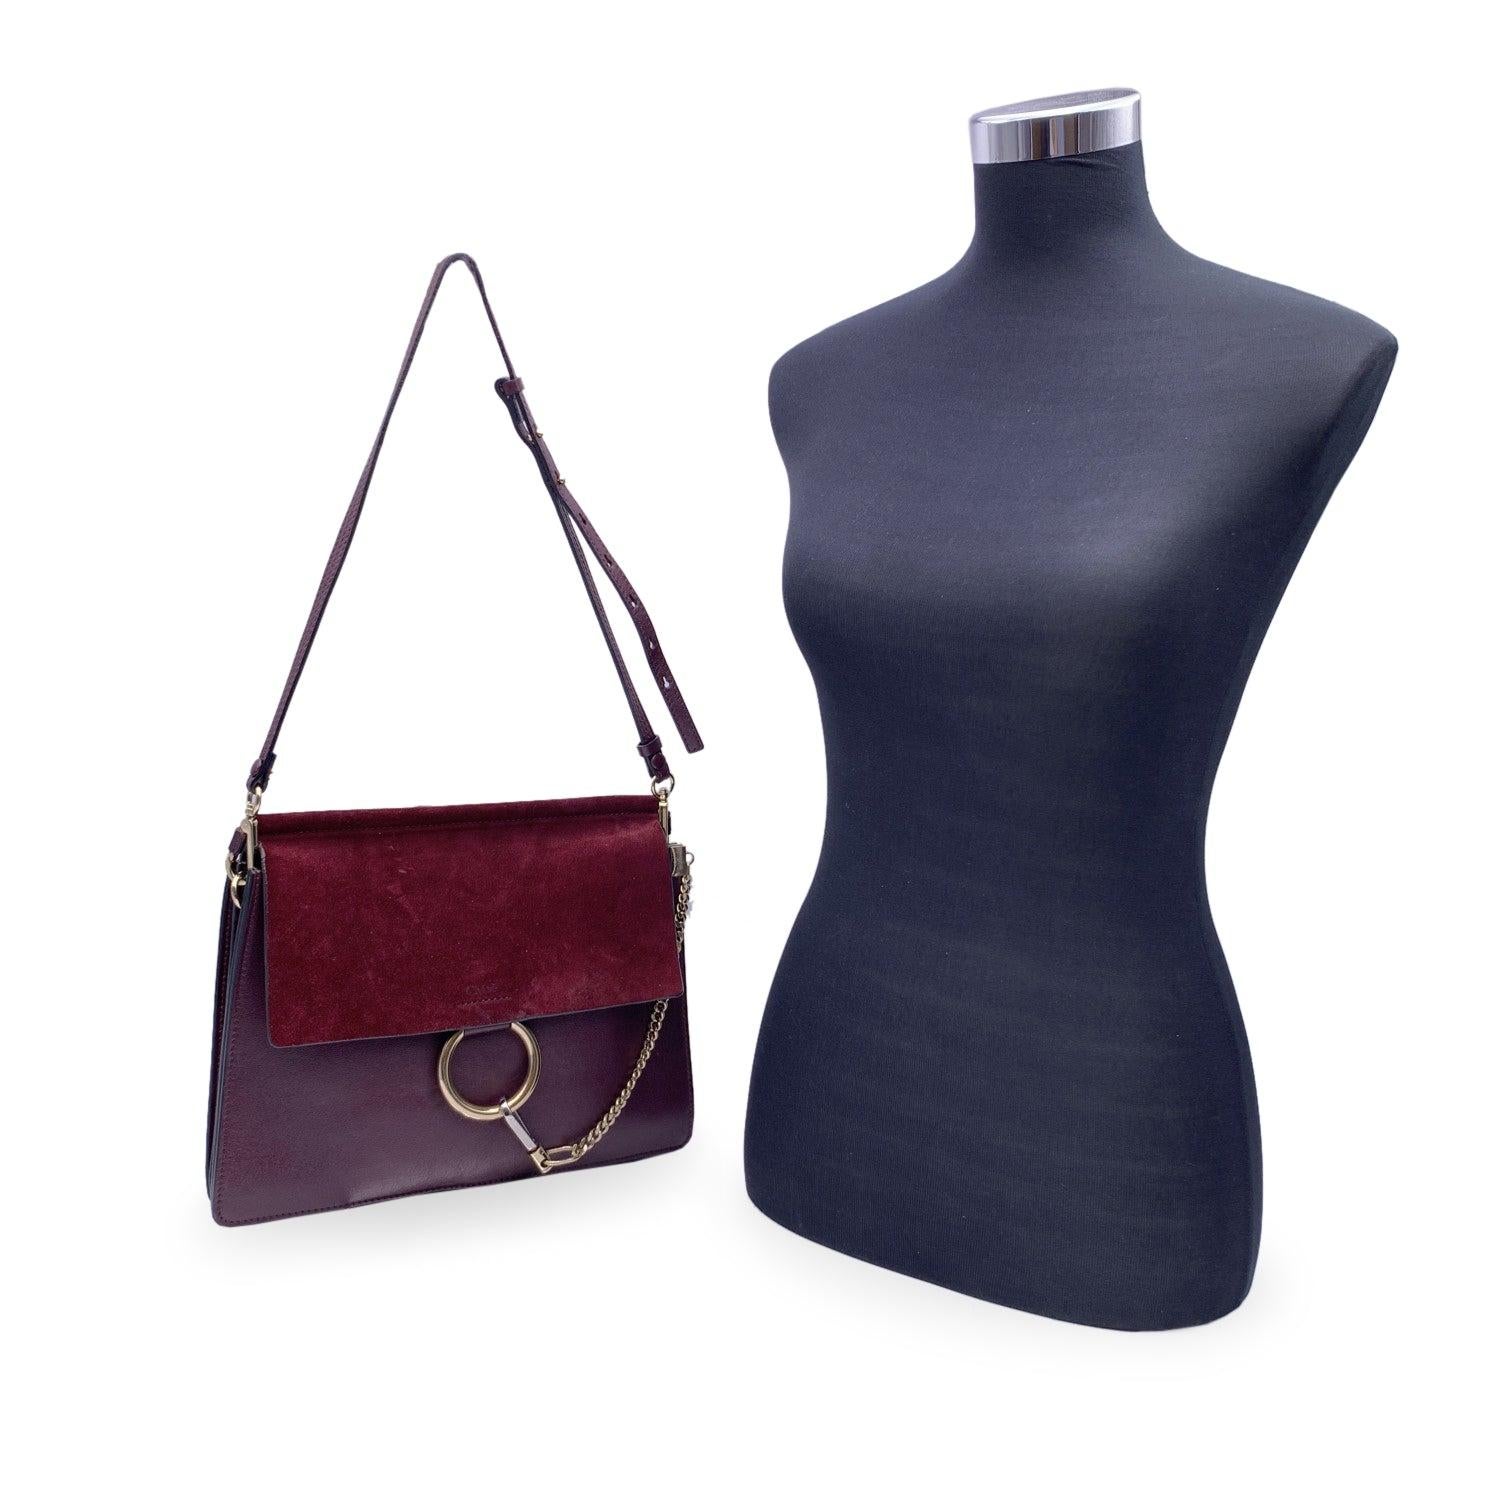 This beautiful Bag will come with a Certificate of Authenticity provided by Entrupy. The certificate will be provided at no further cost. Chloé Faye shoulder bag in burgundy suede and leather. The Faye was created for the 2015 spring/summer